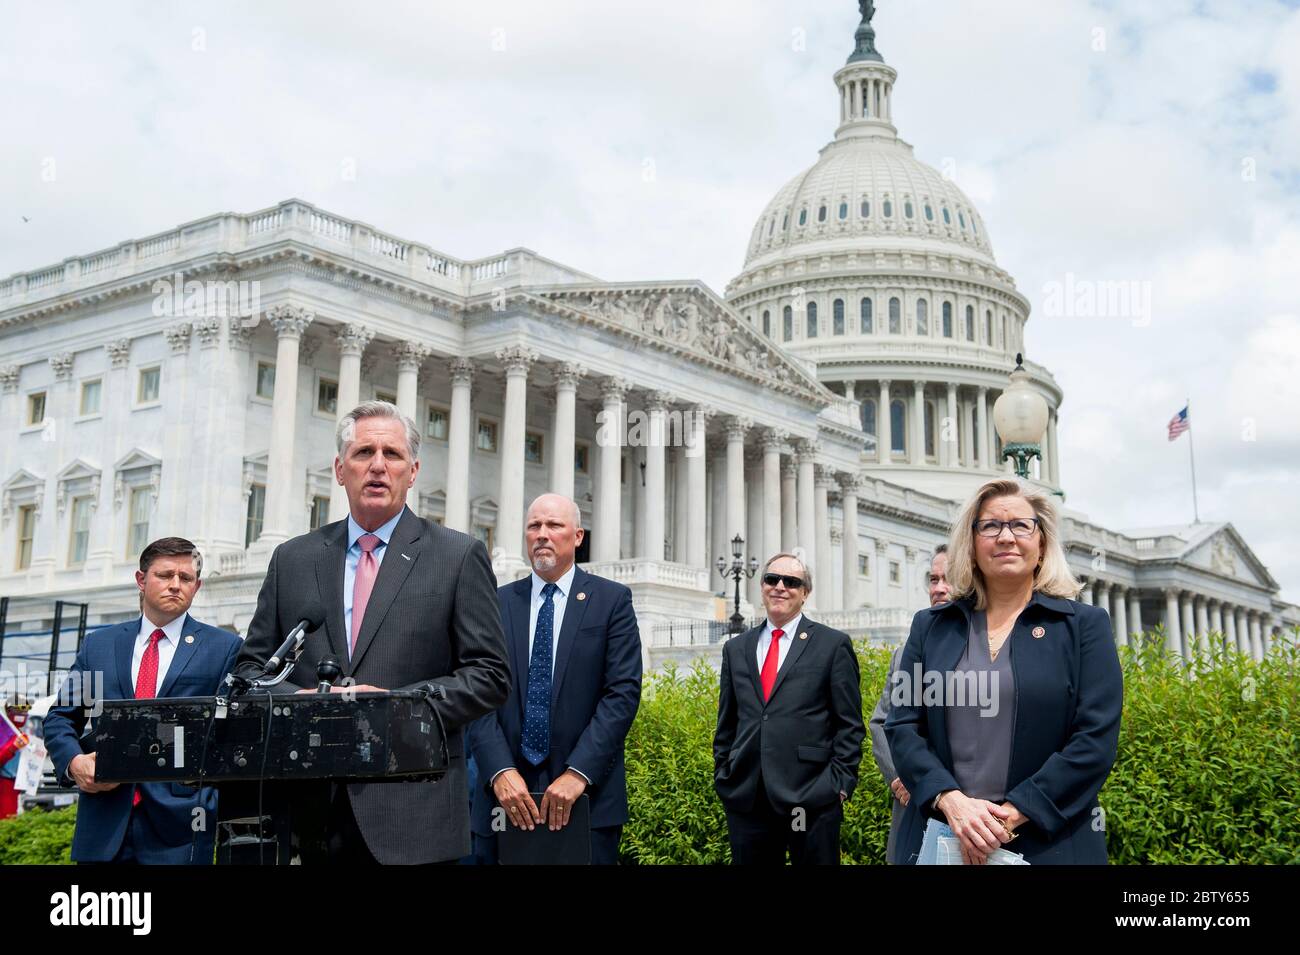 House Minority Leader Rep. Kevin McCarthy (R-Calif.) holds a media availability with House Minority Whip Rep. Steve Scalise (R-LA), House GOP Conference Chairwoman Liz Cheney (R-WY) and others, to announce that Republican leaders have filed a lawsuit against House Speaker Nancy Pelosi and congressional officials in an effort to block the House of Representatives from using a proxy voting system to allow for remote voting during the coronavirus pandemic, outside of the U.S. Capitol in Washington, DC., Wednesday, May 27, 2020. Credit: Rod Lamkey/CNP /MediaPunch Stock Photo